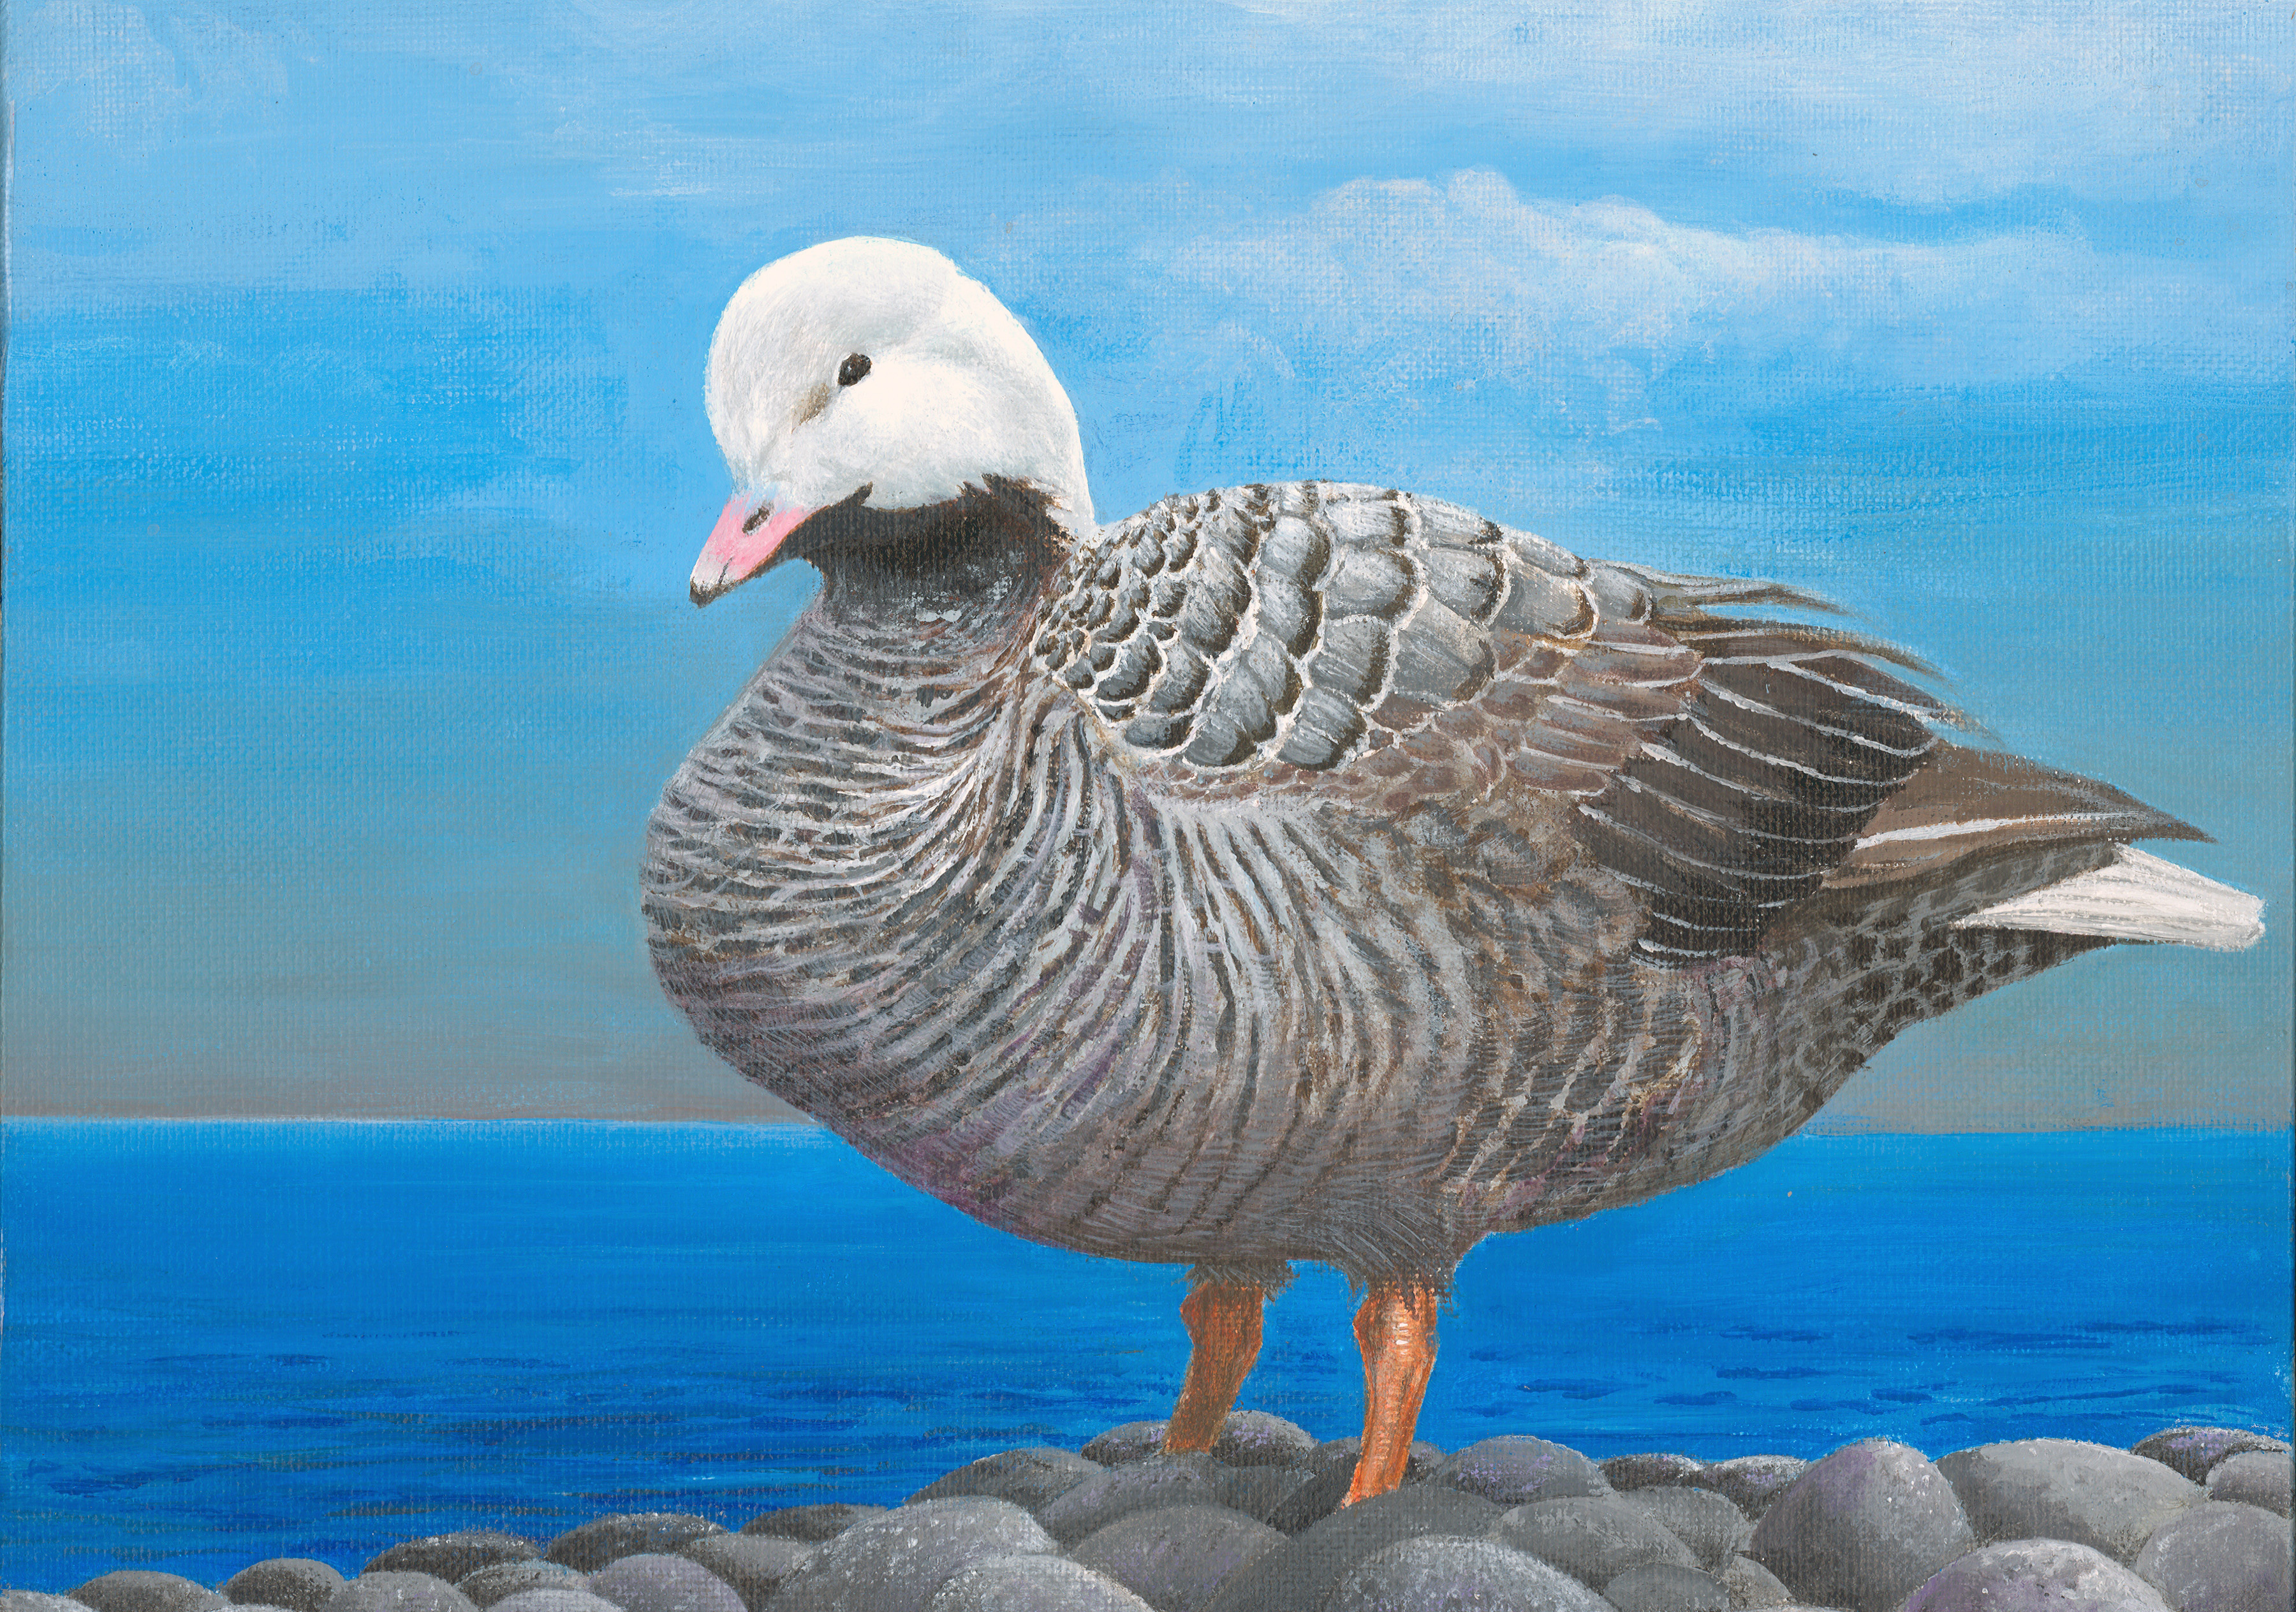 The finalist from New York for the 2011 Junior Duck Stamp Art Contest. (5598450714)